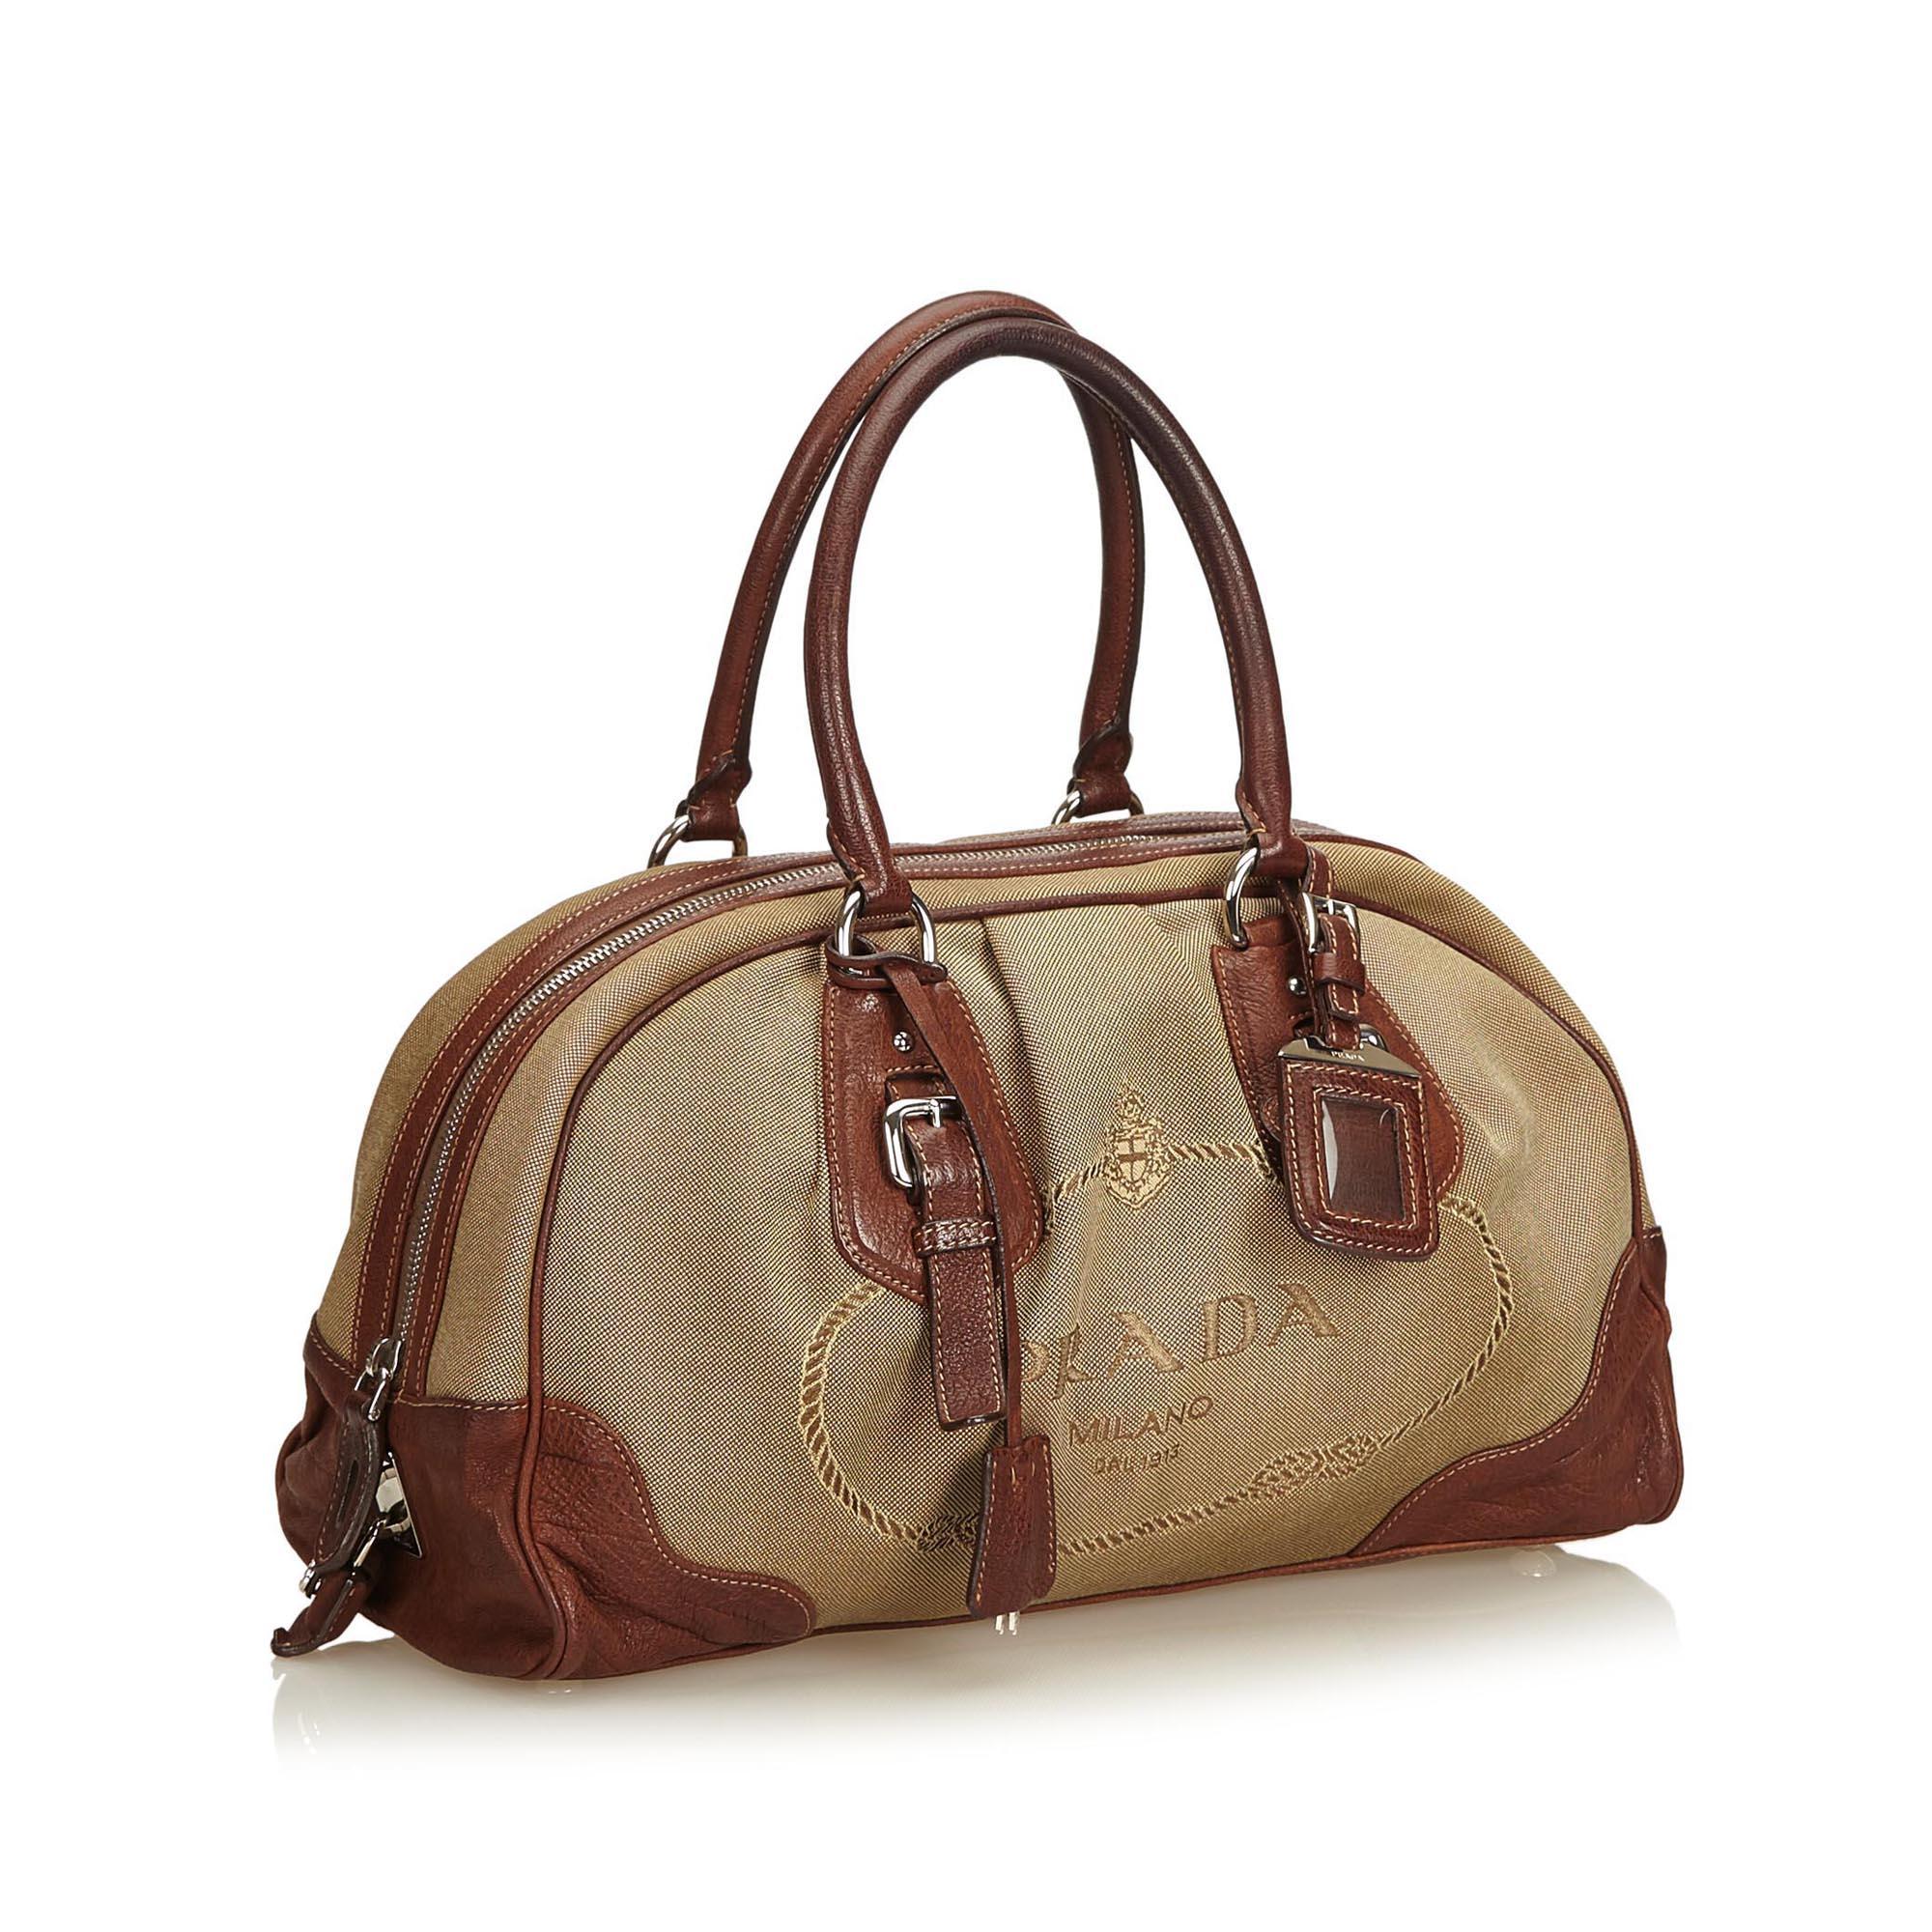 This handbag features a canvas body with leather trim, rolled leather handles, top zip closure, and interior zip pocket.

It carries a B condition rating.

Dimensions: 
Length 23.00 cm
Width 35.00 cm
Depth 16.00 cm
Hand Drop 20.00 cm

Inclusions: